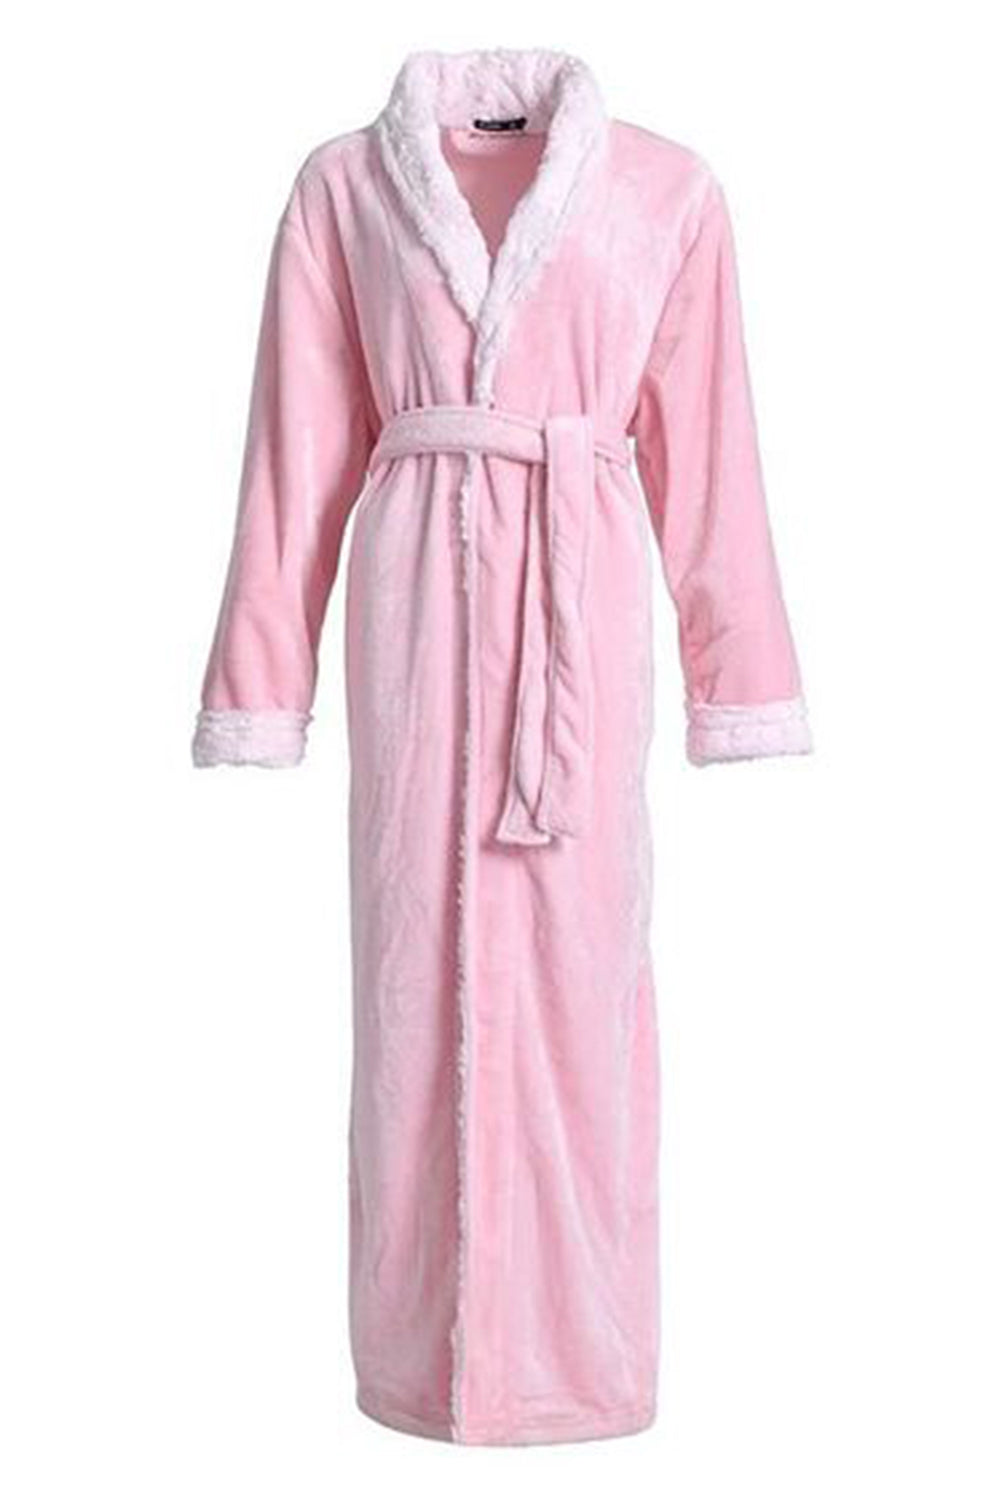 LC453040-10-M, LC453040-10-L, LC453040-10-XL, Pink Women's Solid Color Long Sleeve V Neck House Sleepwear Loungewear Bathrobe With Belt